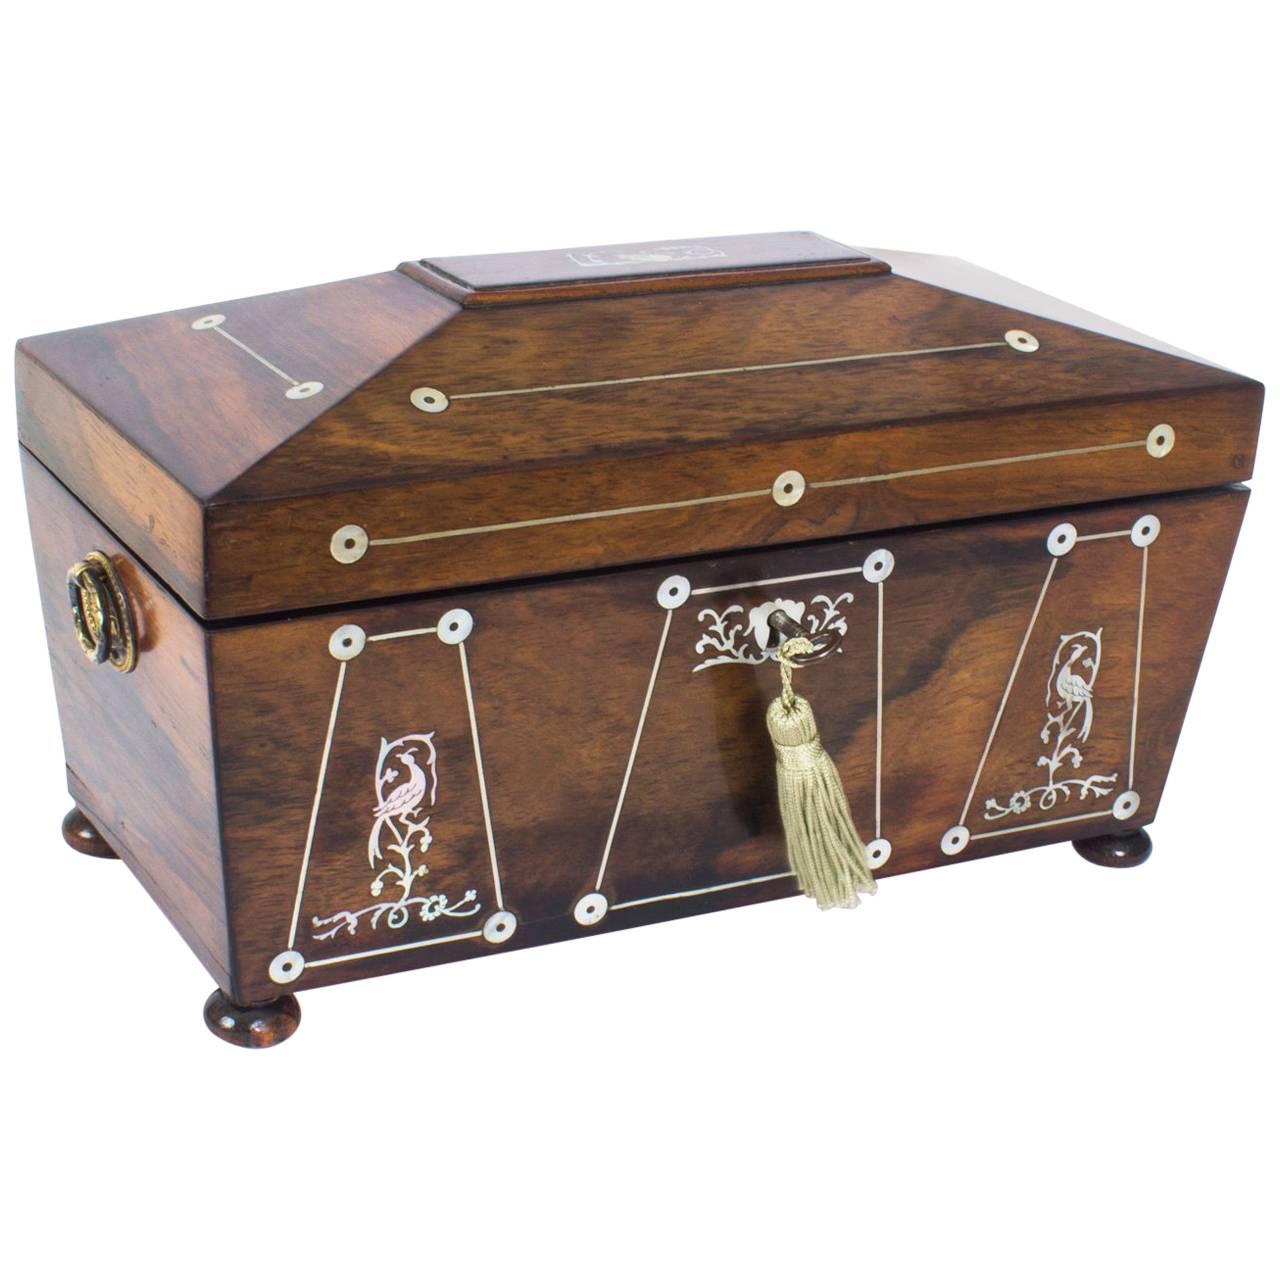 Antique Regency Rosewood and Mother-of-Pearl Inlaid Casket, 19th Century